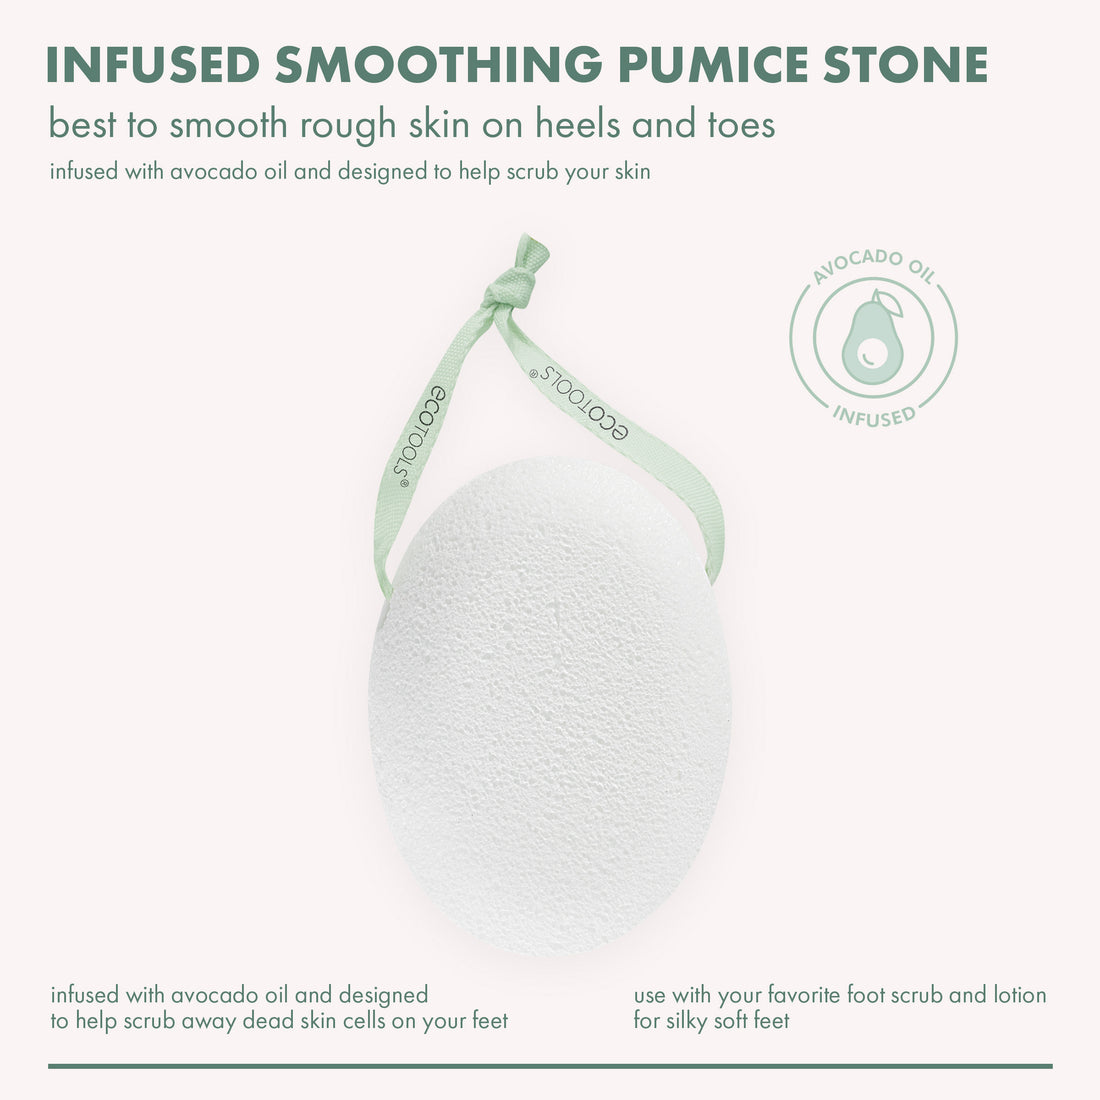 How to Use a Pumice Stone for Your Softest, Smoothest Feet Ever